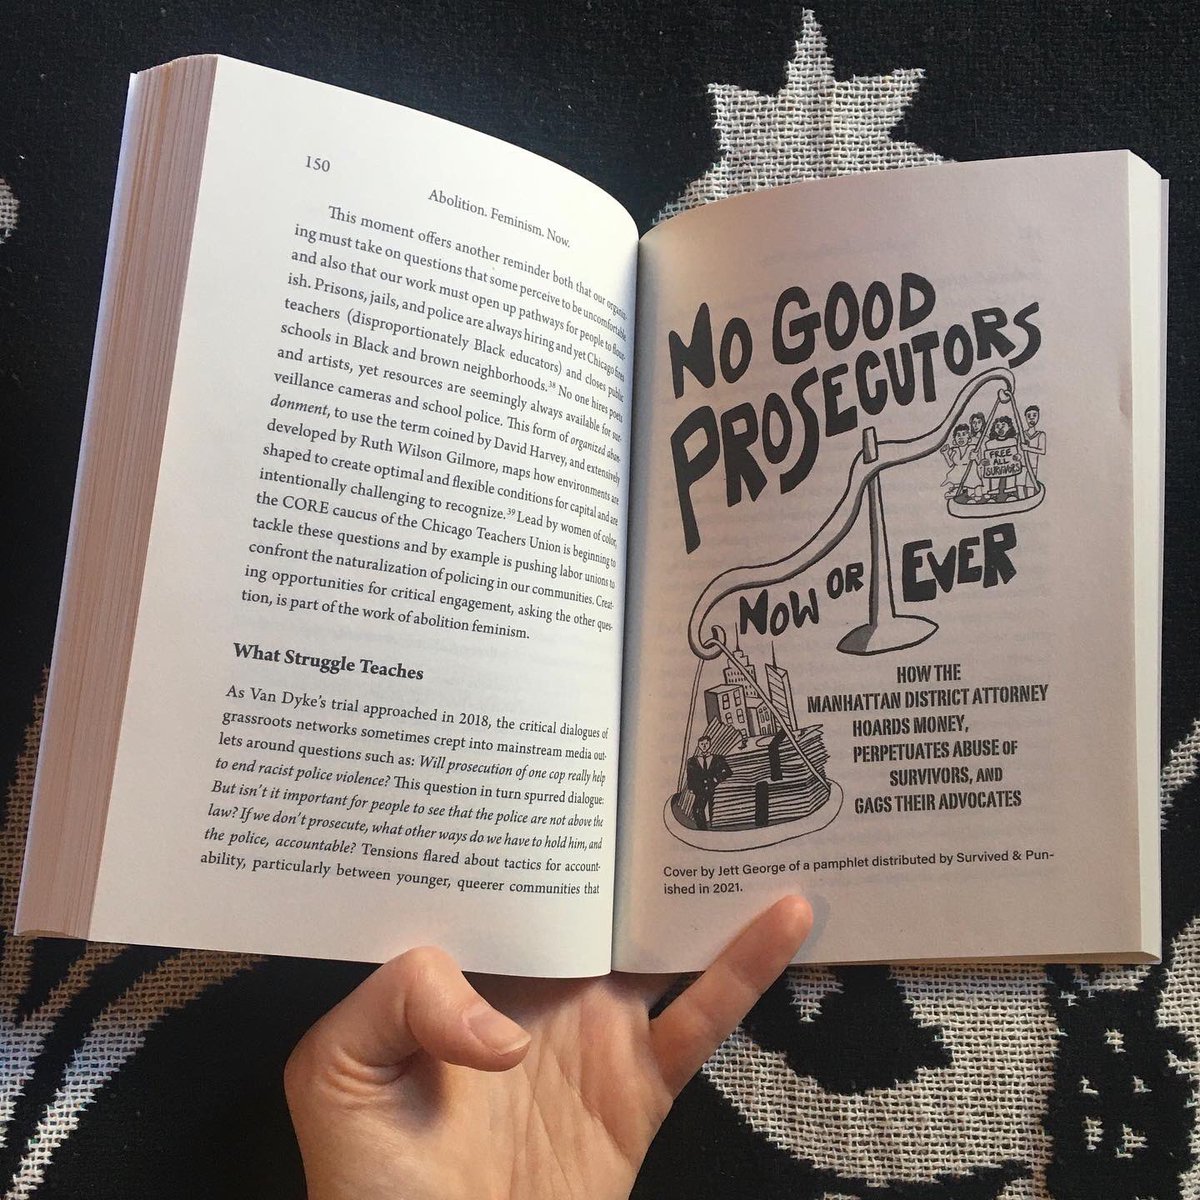 I’m so excited to have an illustration included in this amazing book! 💥🔥

You can get a copy @haymarketbooks and read the No Good Prosecutors zine from @survivepunishNY at the link in my bio. 

#AbolitionFeminismNow #AbolitionNow #FreeAllSurvivors